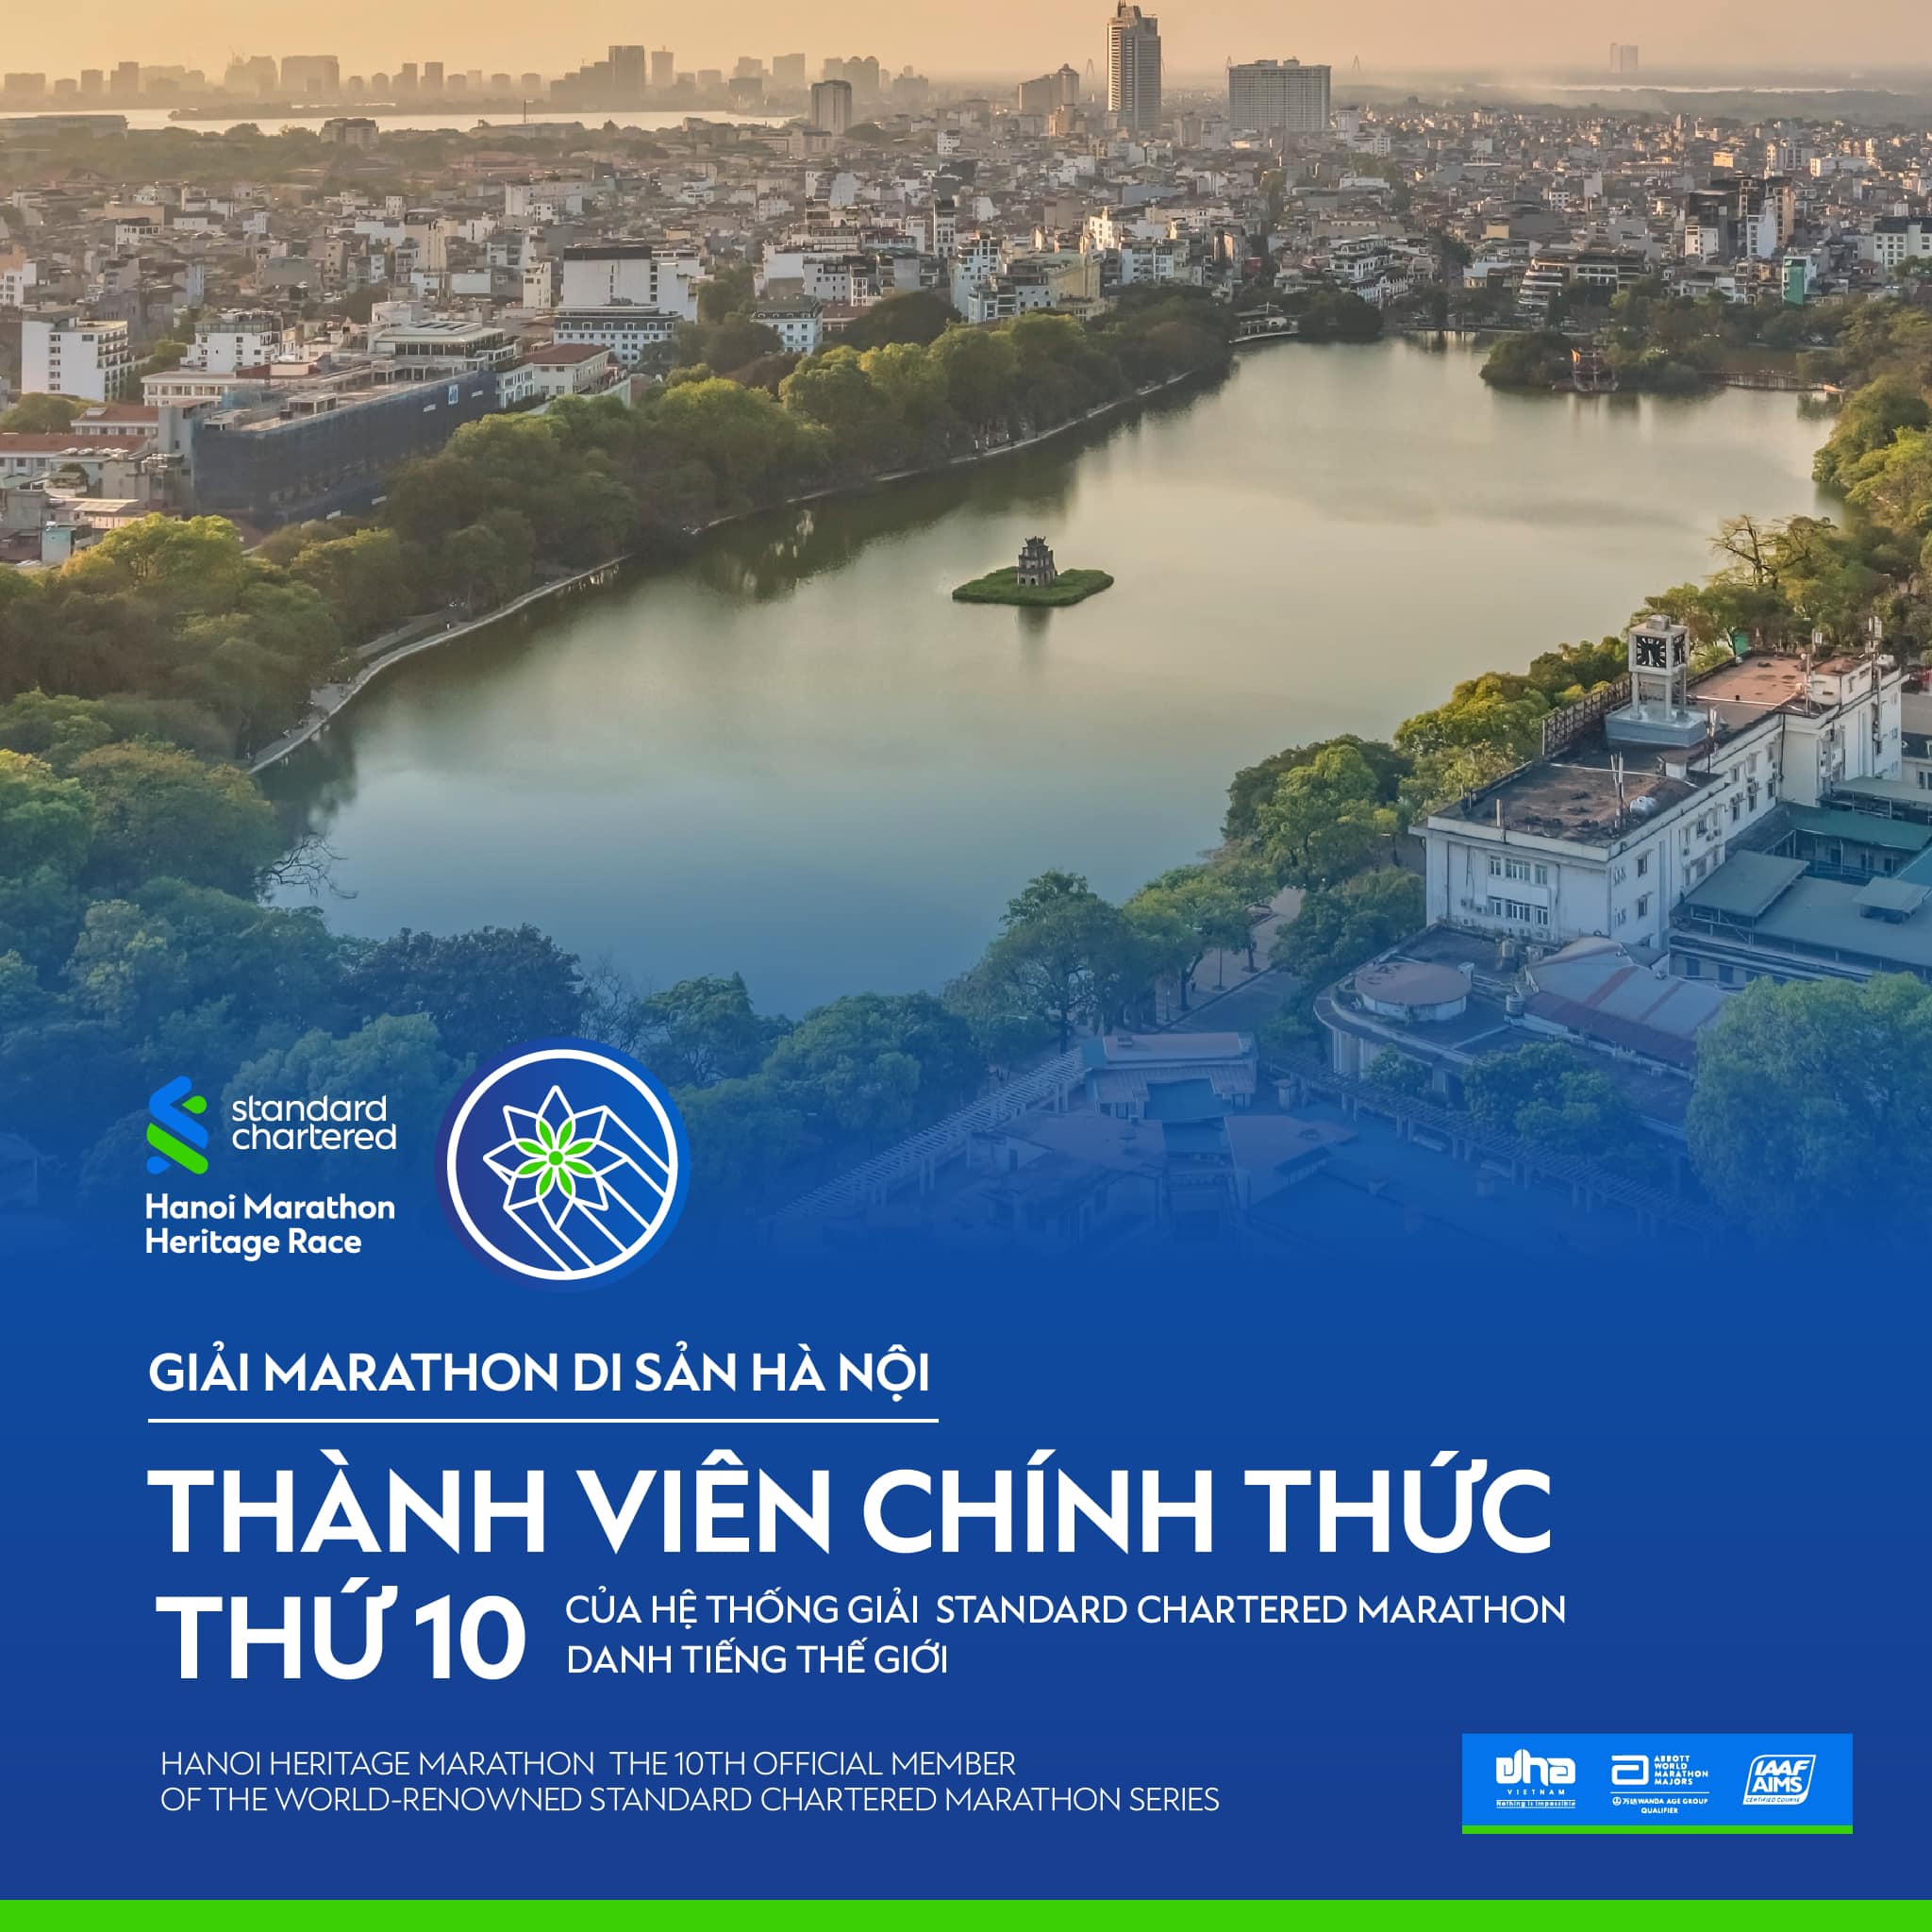 Hanoi Heritage Marathon: The 10th official member of the world-renowned Standard Chartered Marathon series